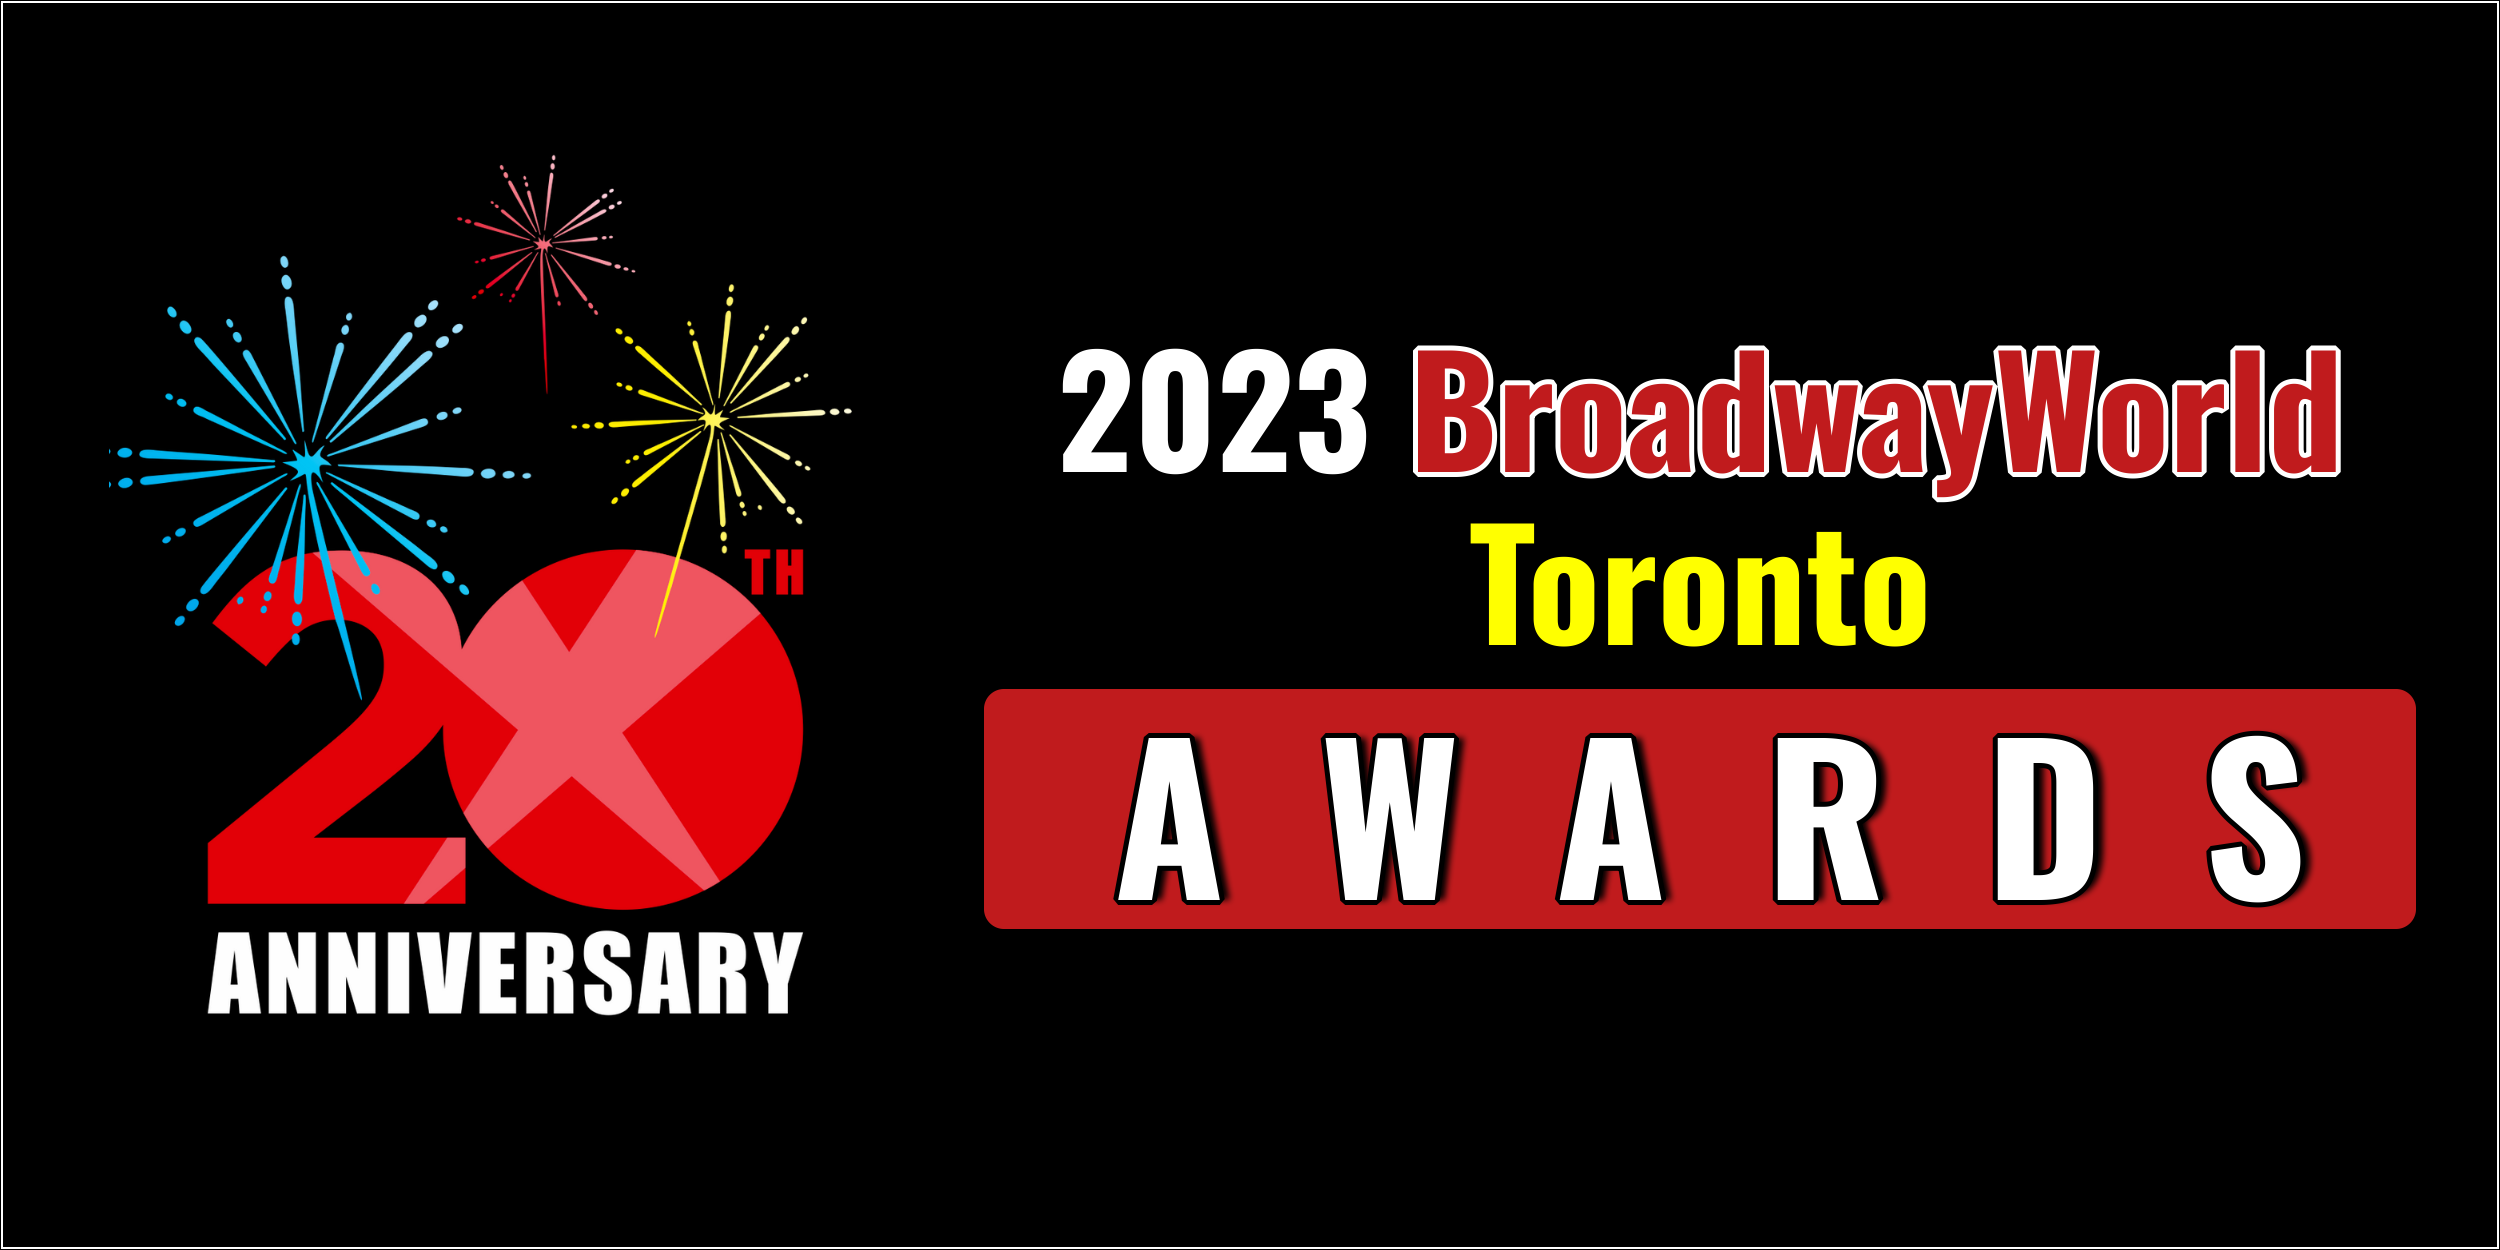 Latest Standings Announced For The 2023 BroadwayWorld Toronto Awards;  Leads Favorite Local Theatre! 